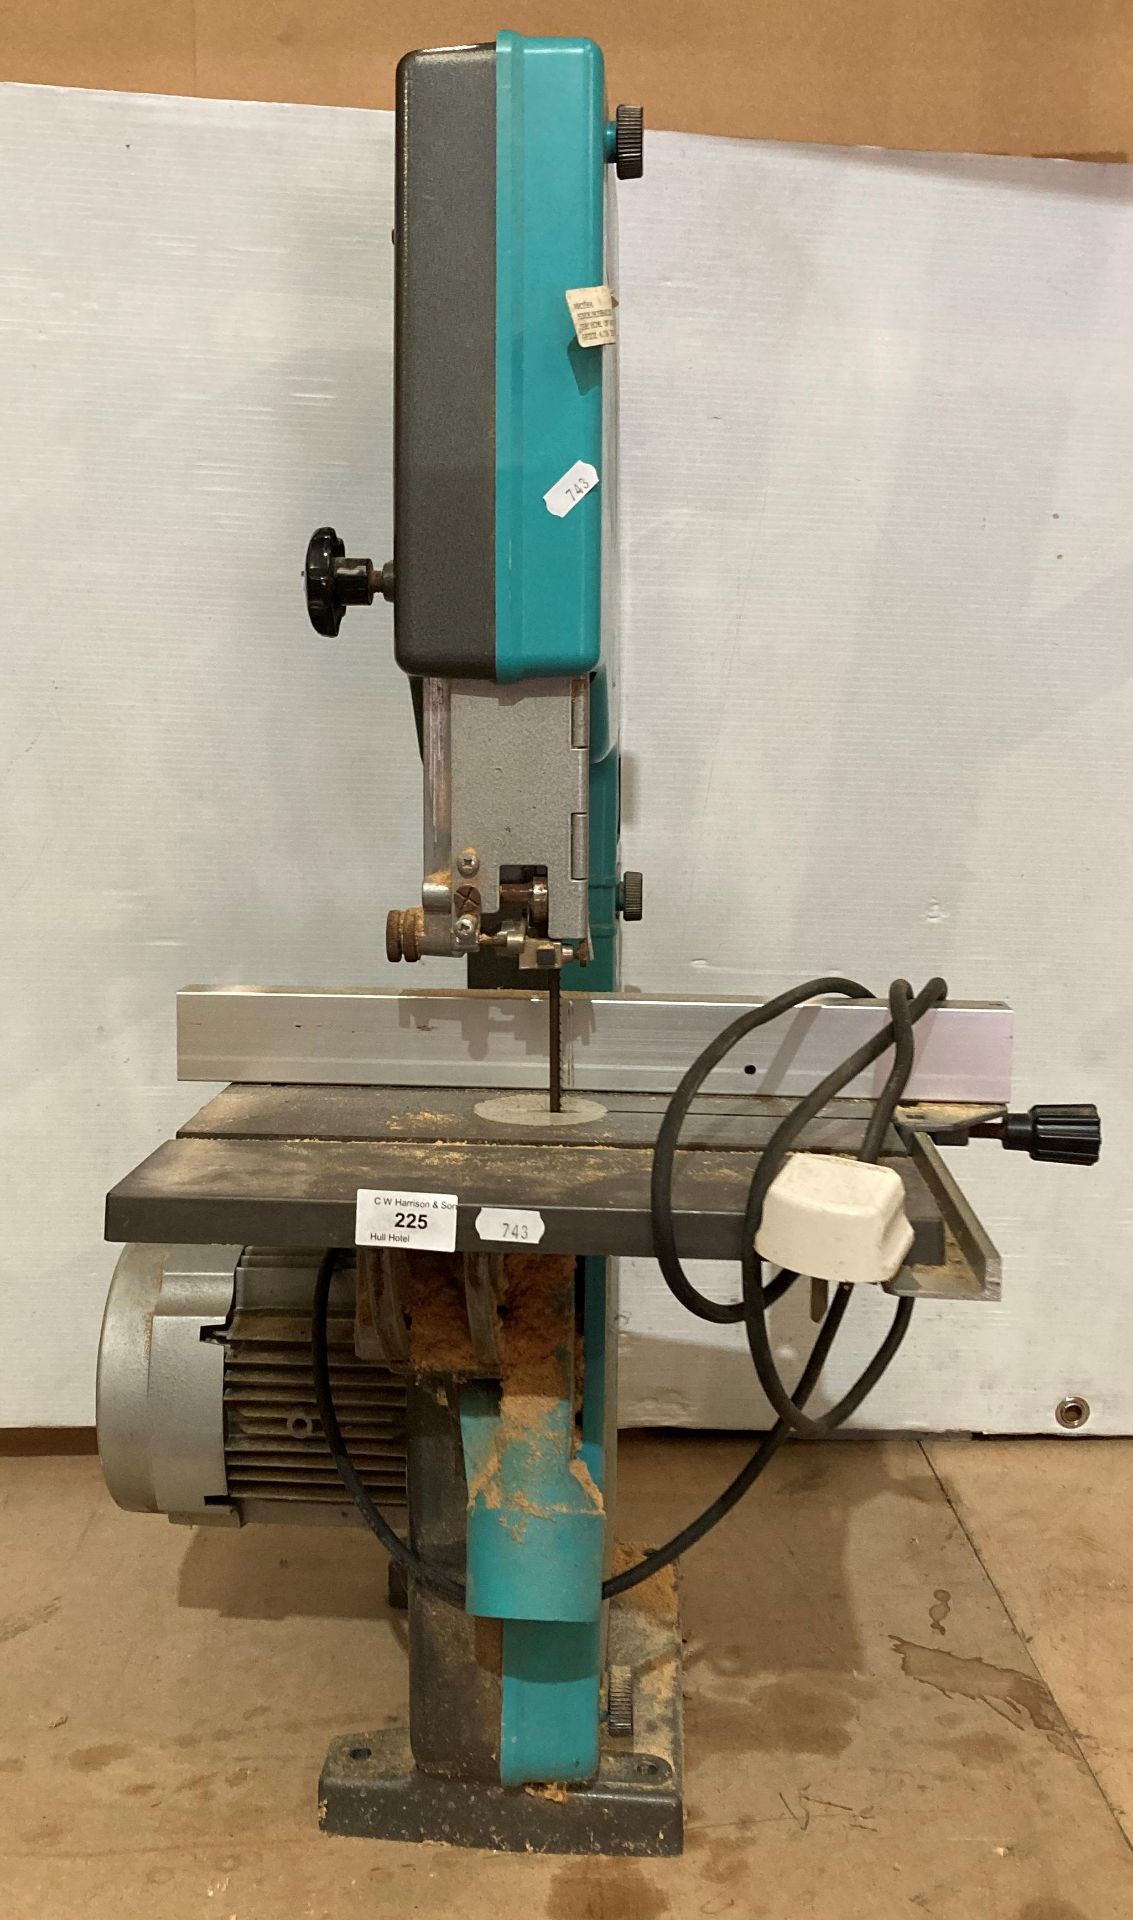 Inca Euro 260 table-top band saw (240v) approximately 90cm high (saleroom location: MA3)